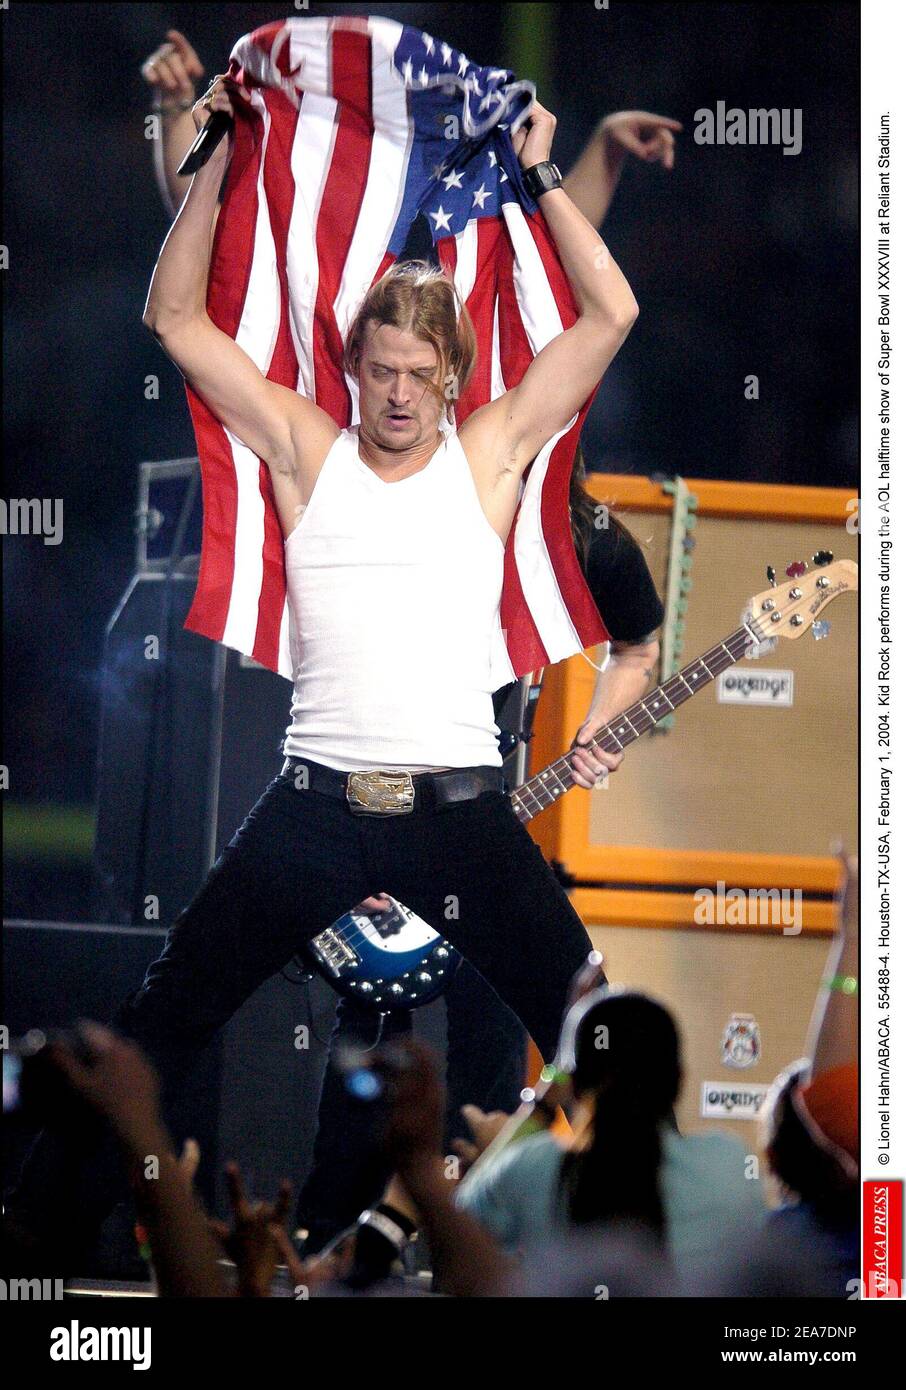 © Lionel Hahn/ABACA. 55488-4. Houston-TX-USA, February 1, 2004. Kid Rock performs during the AOL halftime show of Super Bowl XXXVIII at Reliant Stadium. Stock Photo